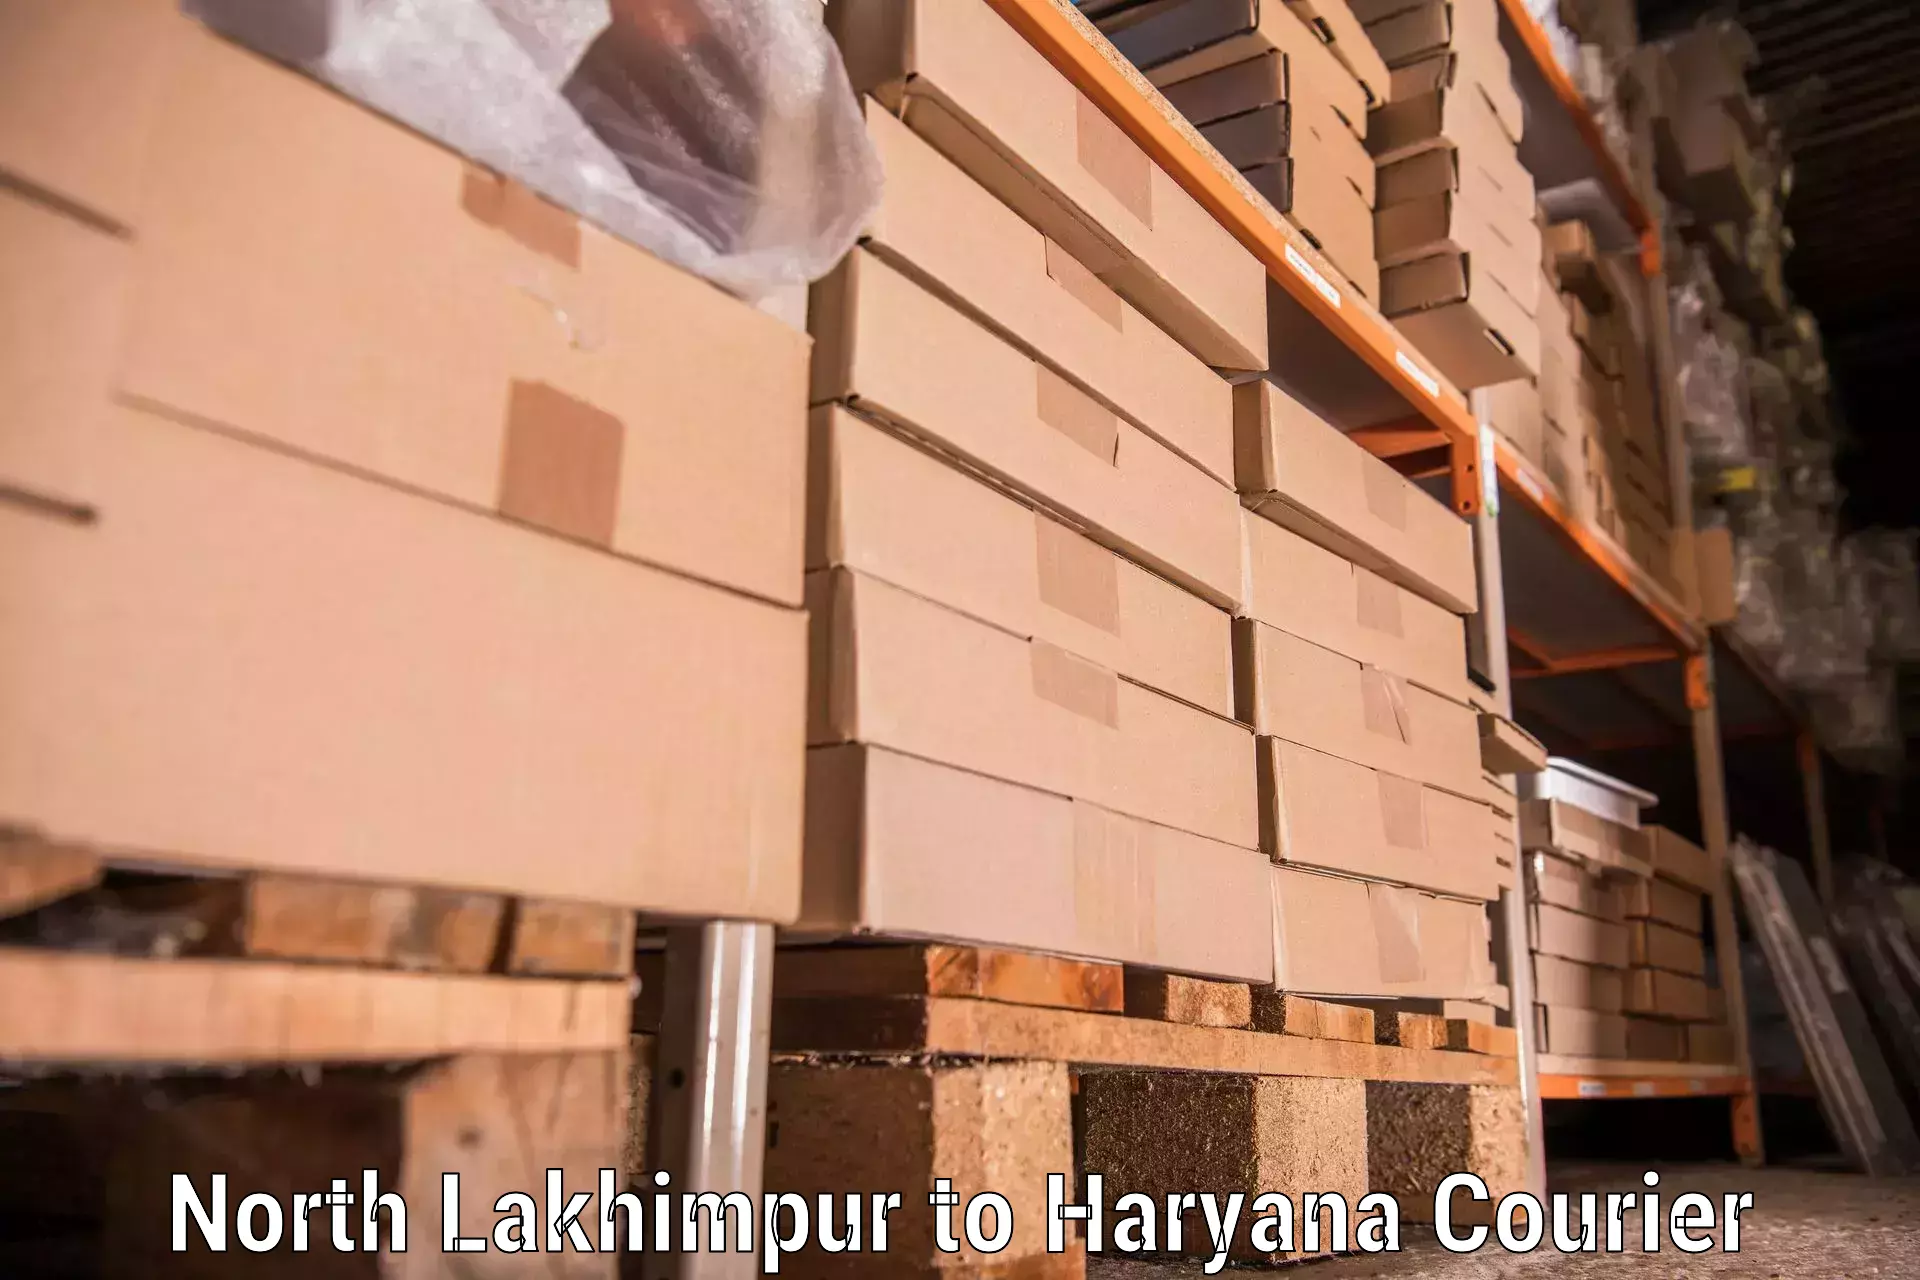 Quality relocation services North Lakhimpur to Rohtak